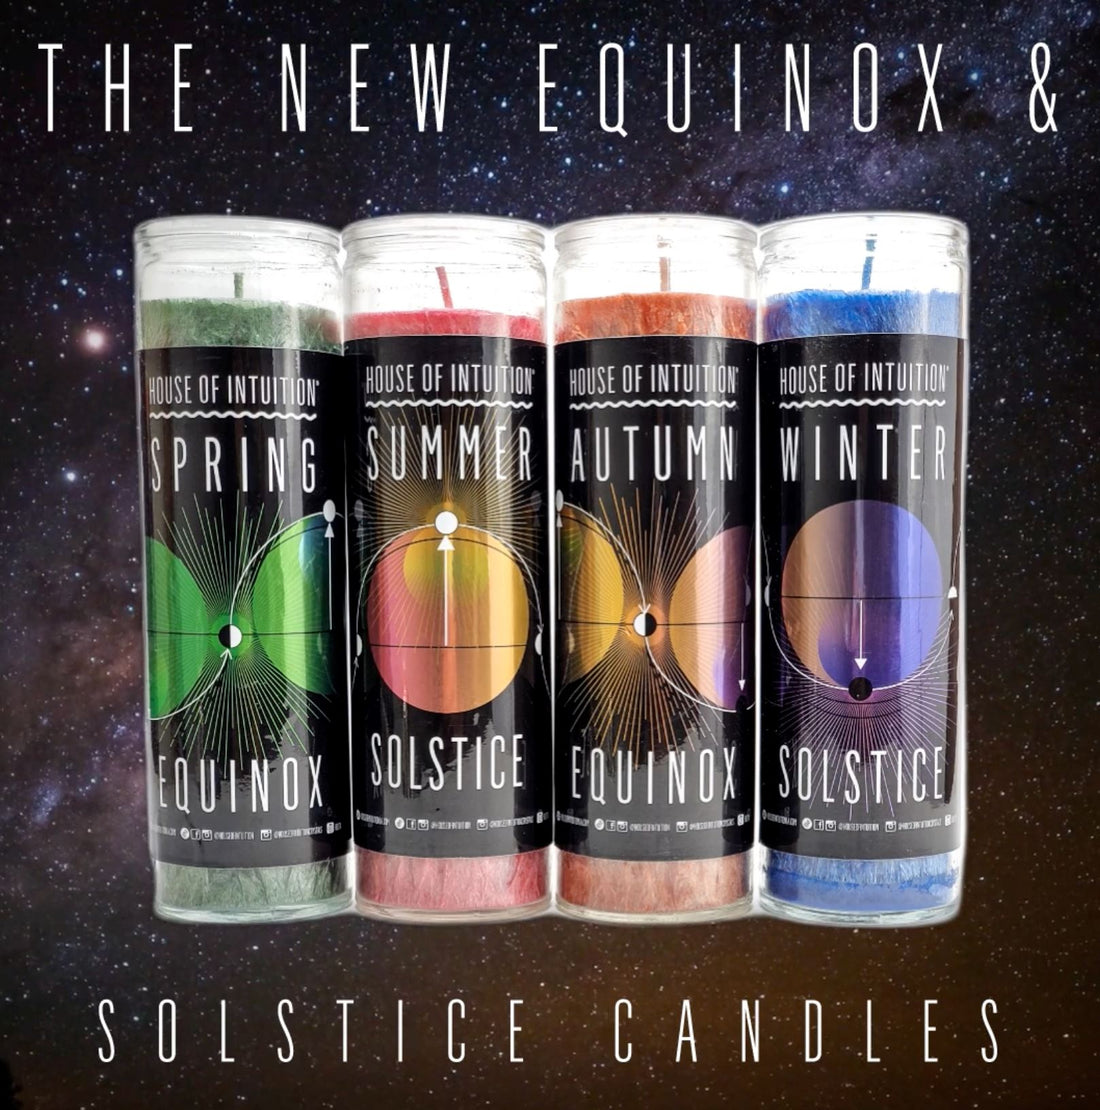 Summer Solstice Magic Candle (Limited Edition) Mercury Retrograde Candle House of Intuition 